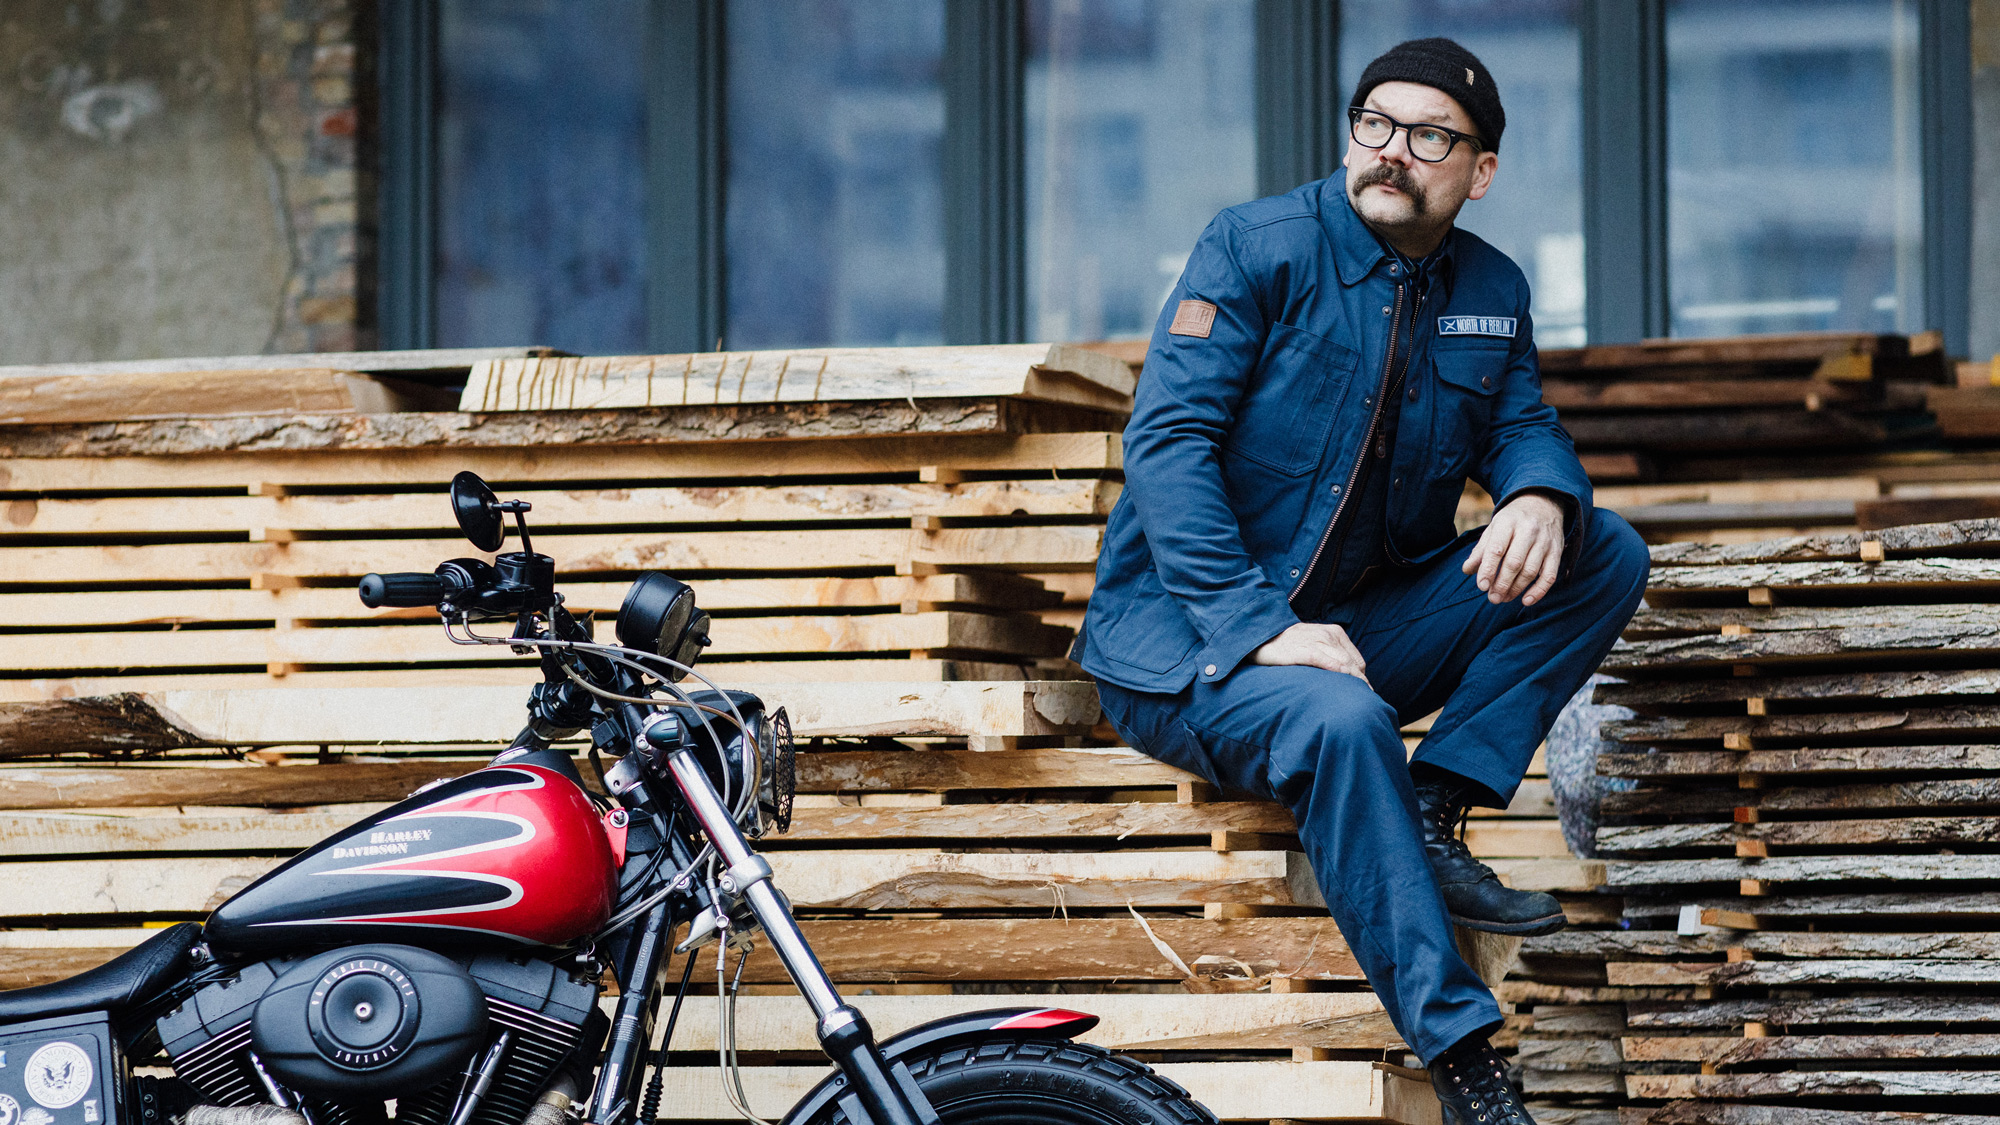 Utility Riding Jacket - A Motorcycle Rider wearing North of Berlin